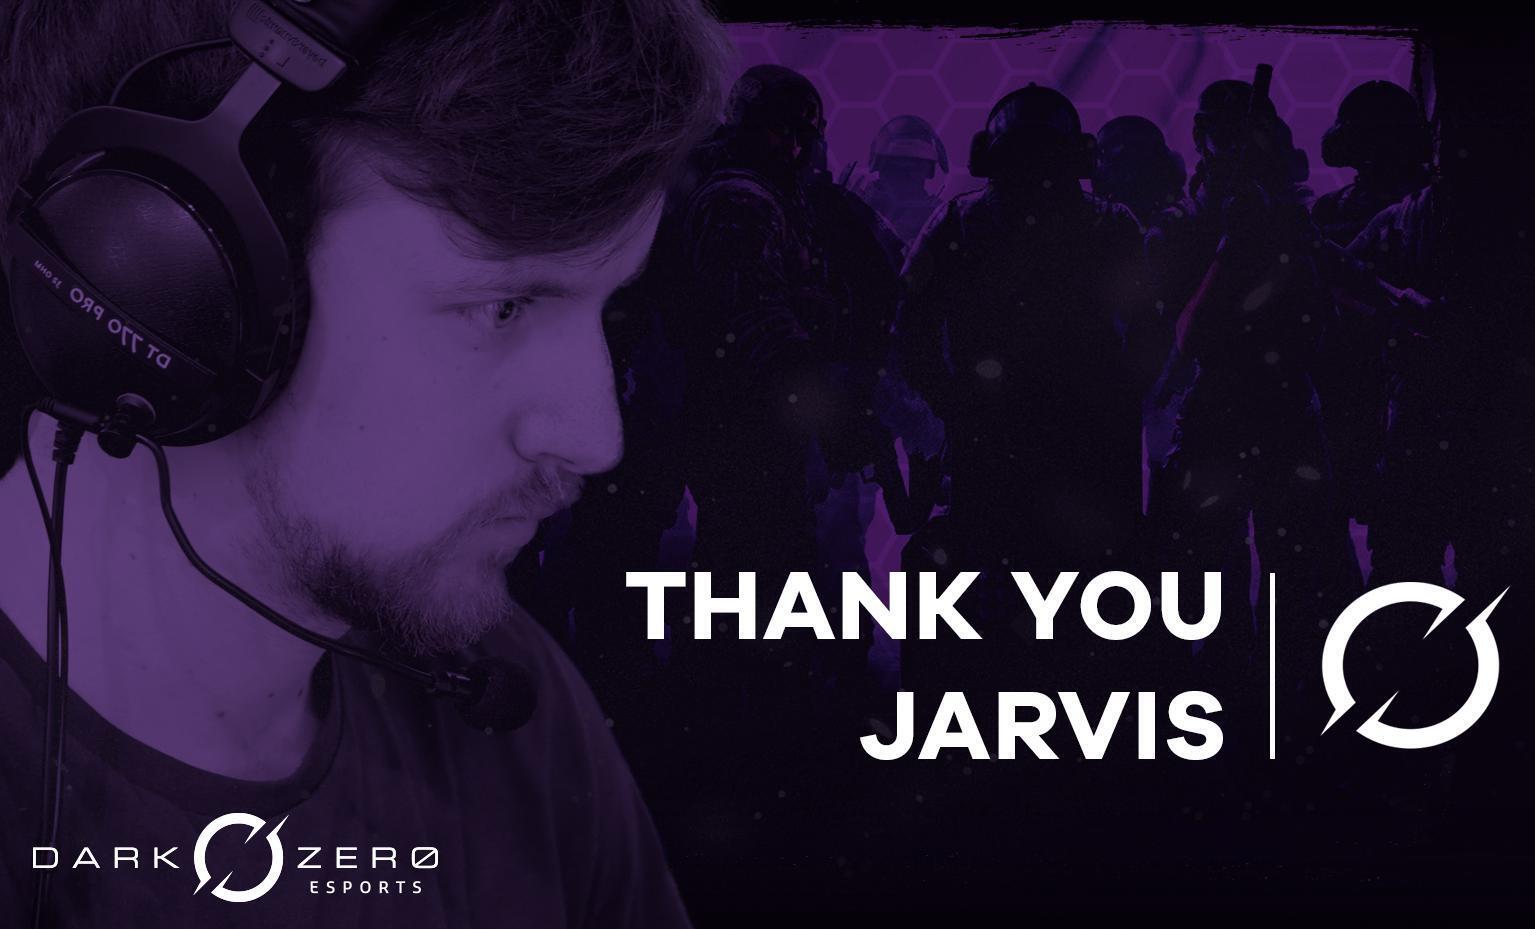 DarkZero has swapped Jarvis for Hyper in their Rainbow Six Siege Roster. (Image courtesy of DarkZero)